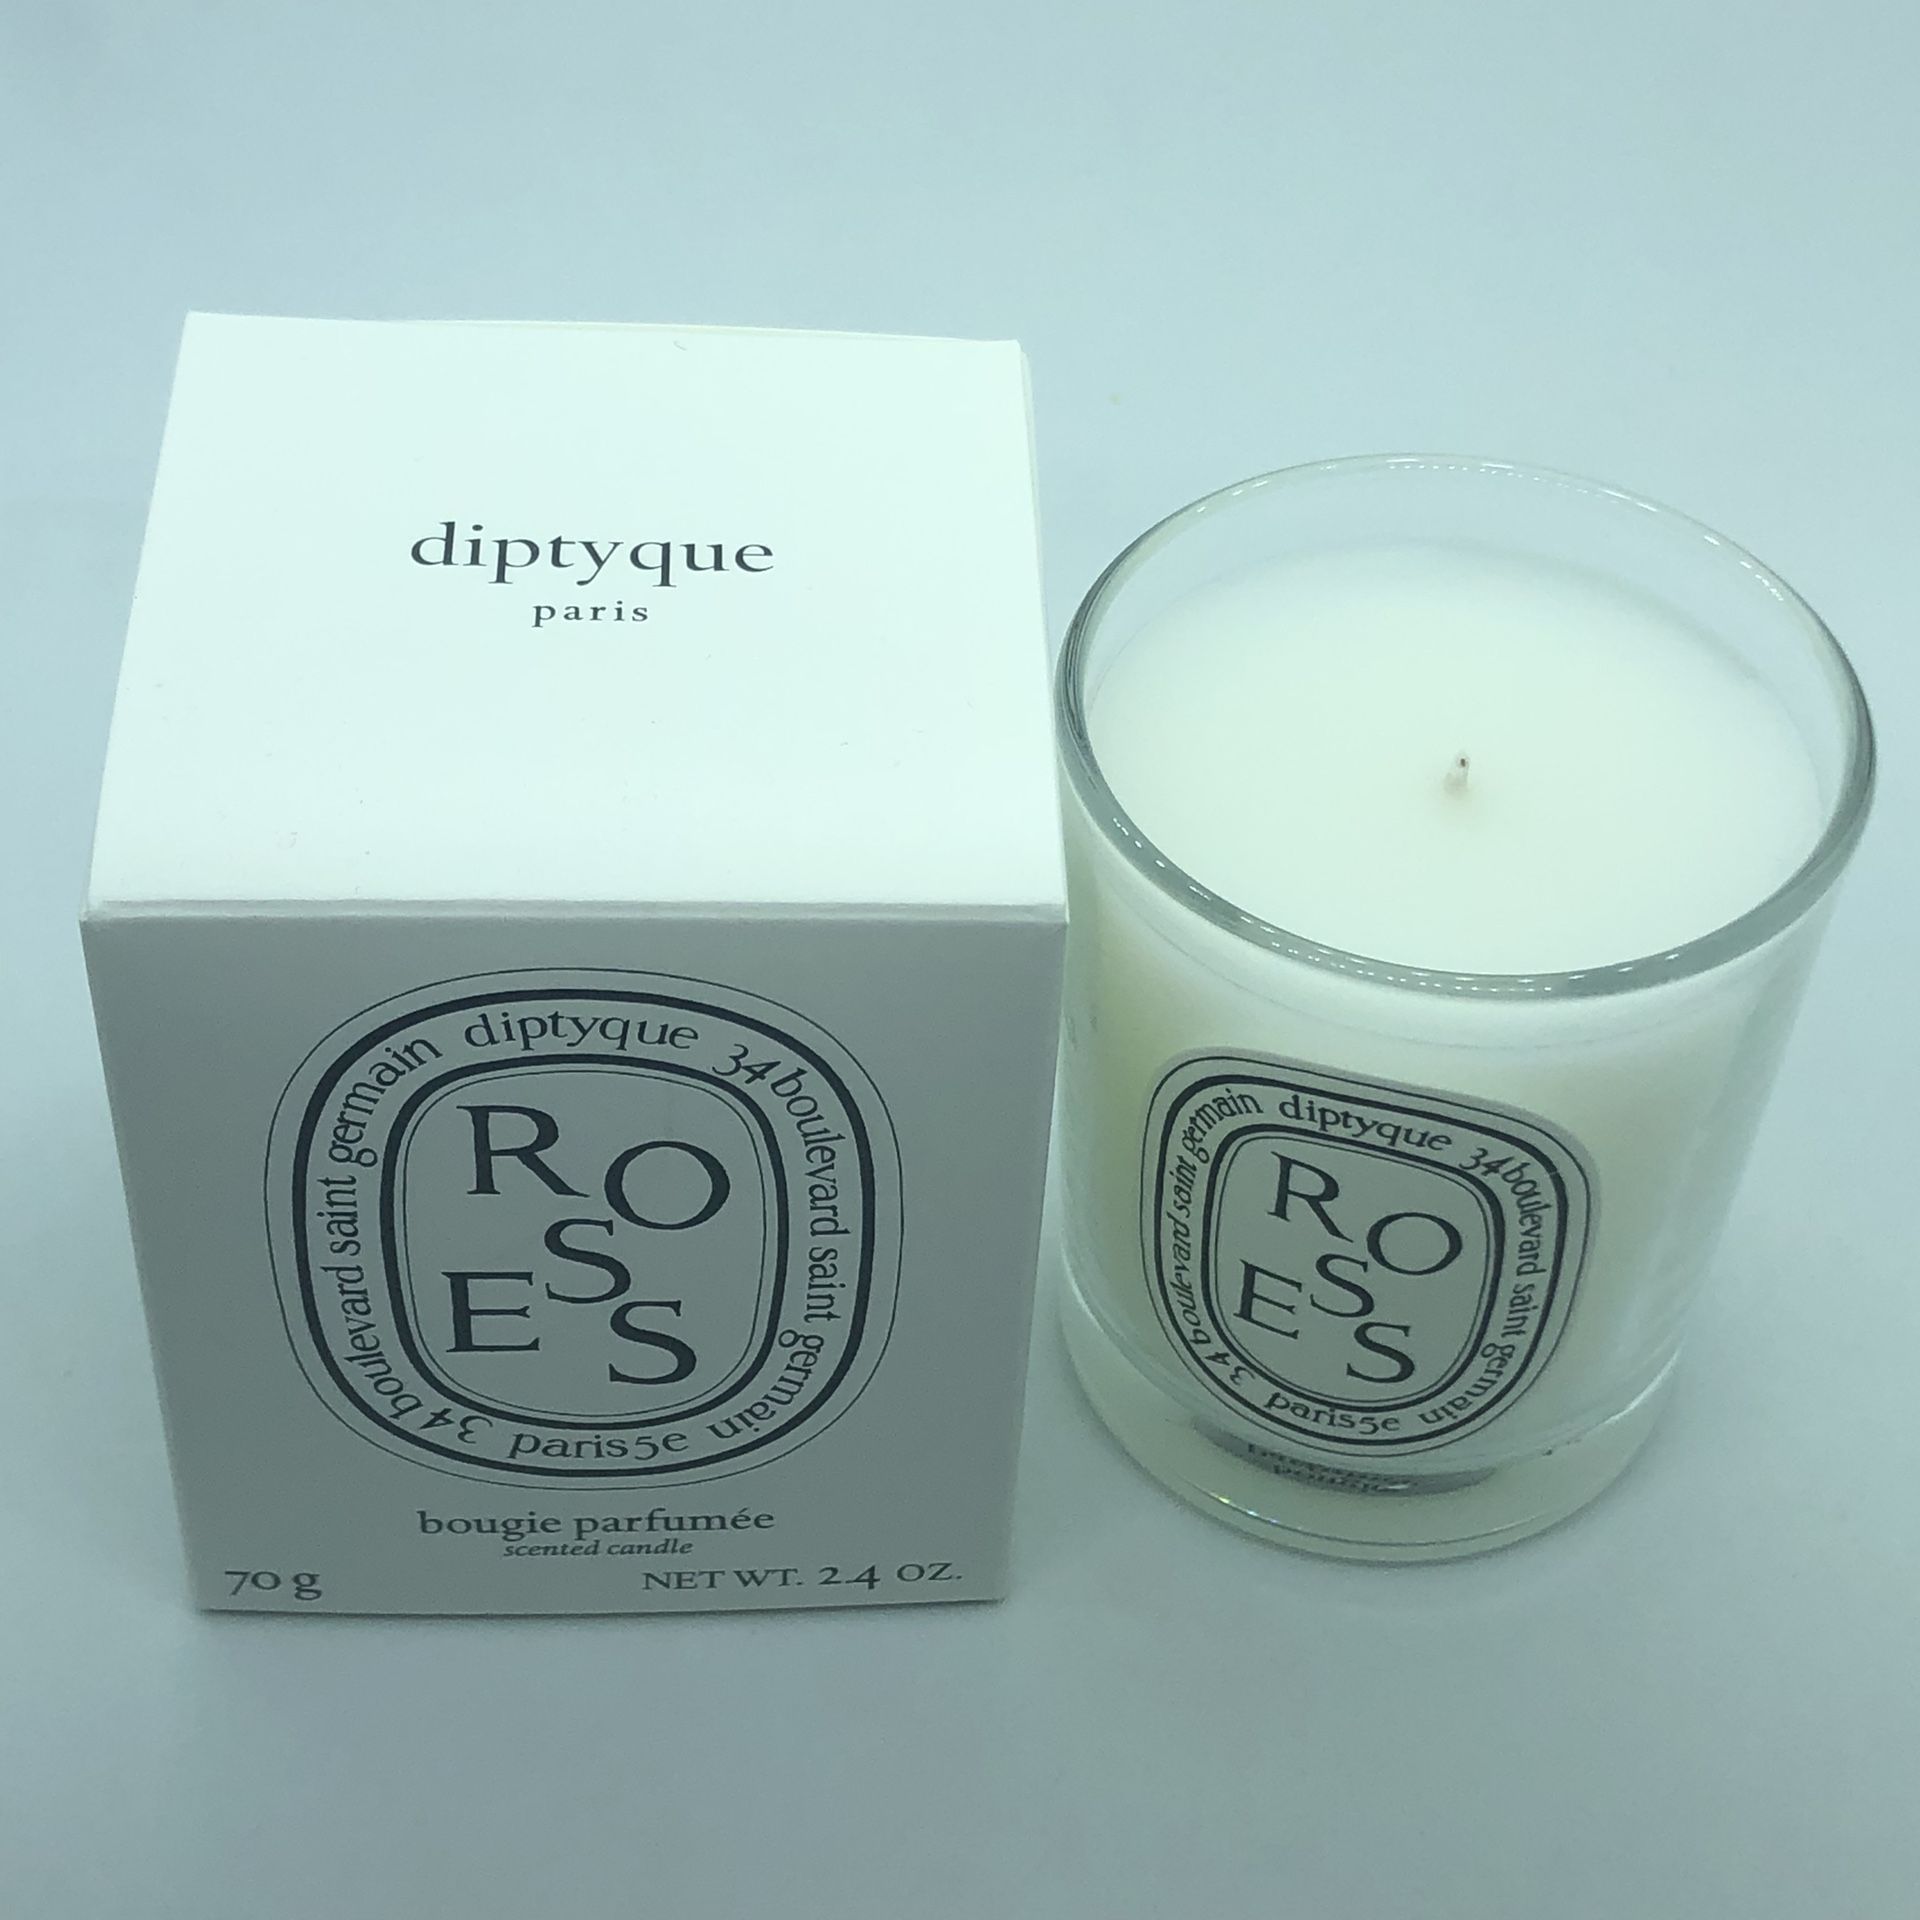 diptyque scented candle bougie parfume 70g/2.4 oz new in box